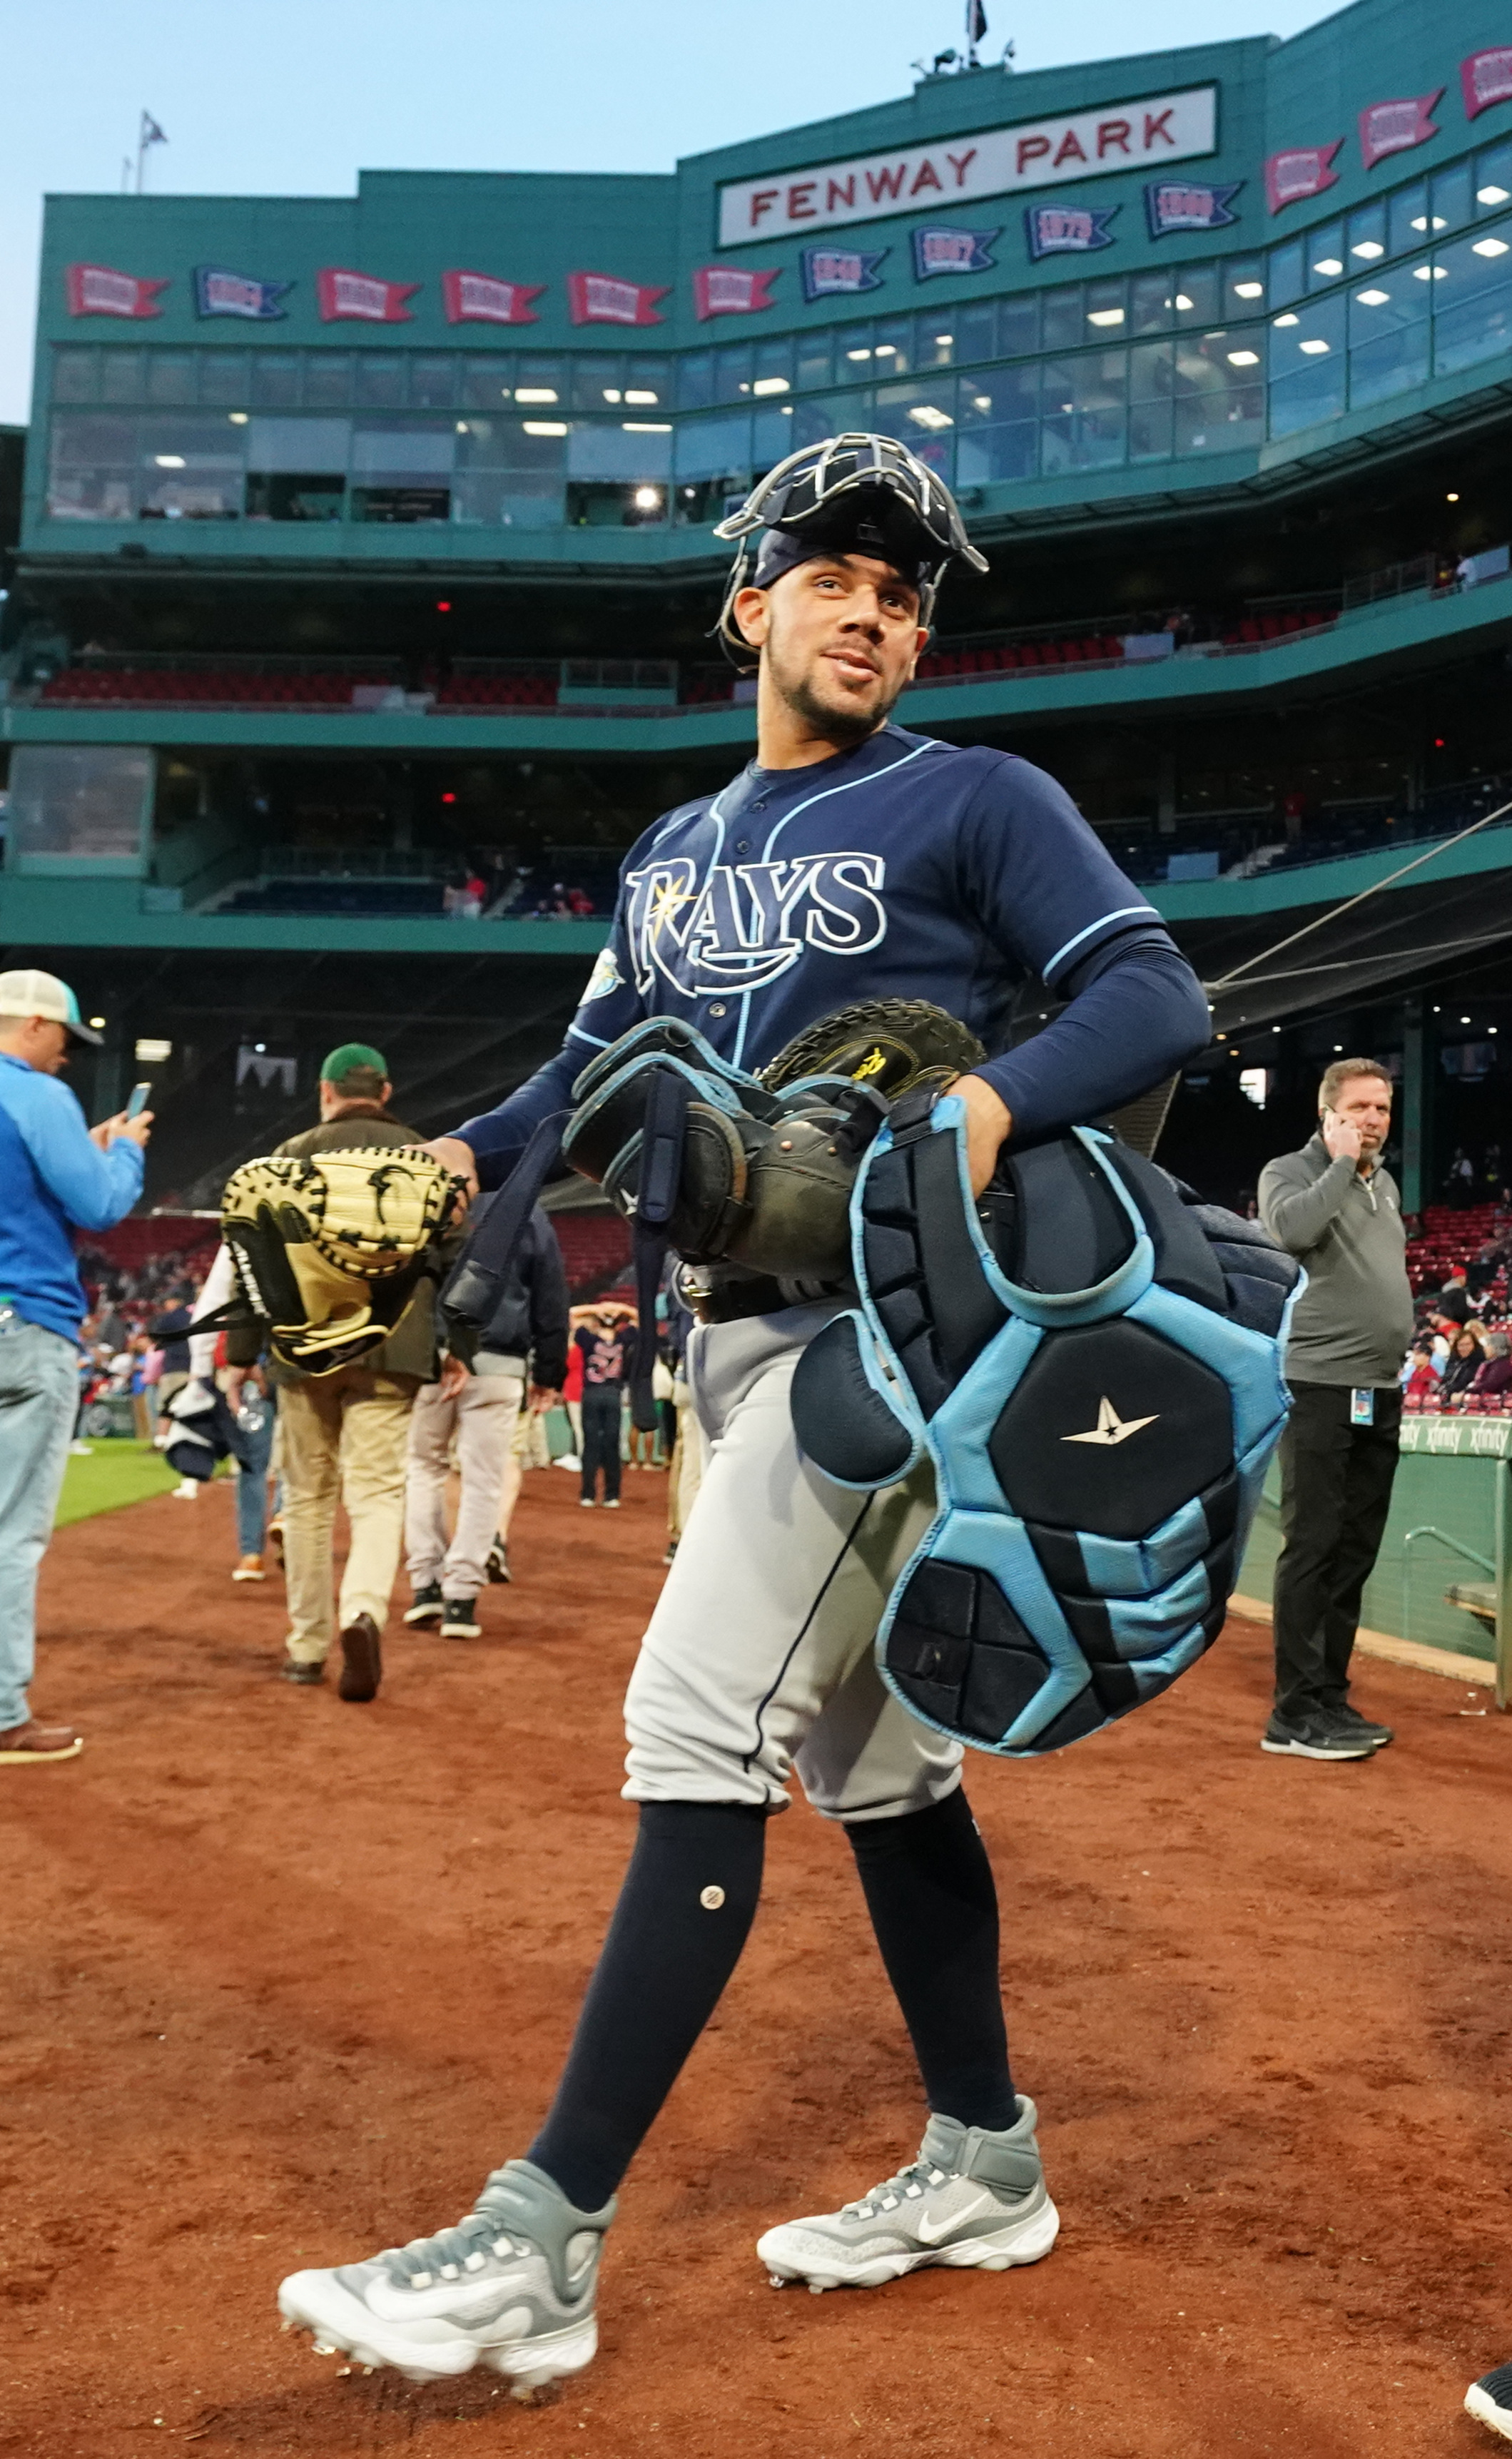 Tampa Bay Rays beat Boston Red Sox to become the first team since